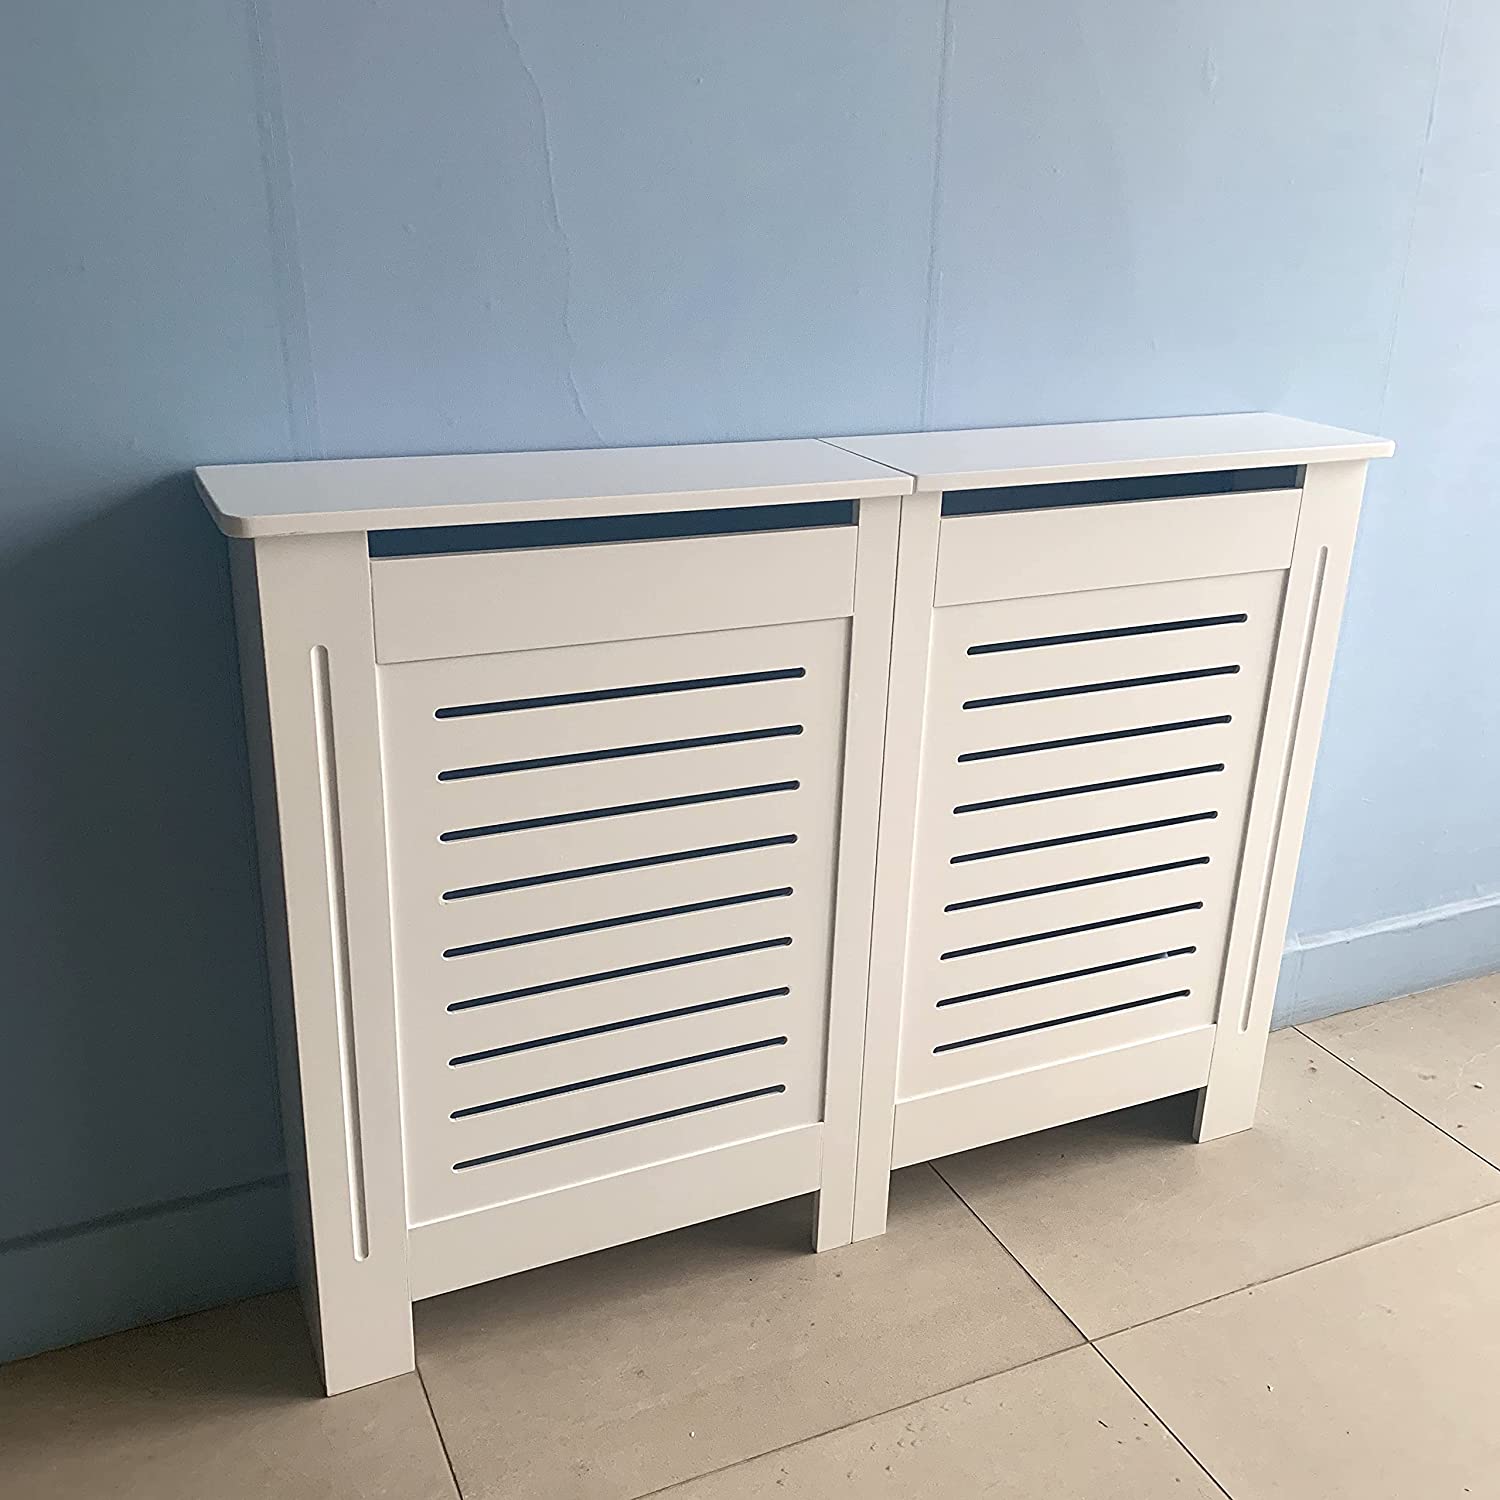 White Wooden Horizontal Slanted Radiator Cover Grill Cabinet Panel Shelf Hallway Furniture In 3 Sizes HYGRAD BUILT TO SURVIVE